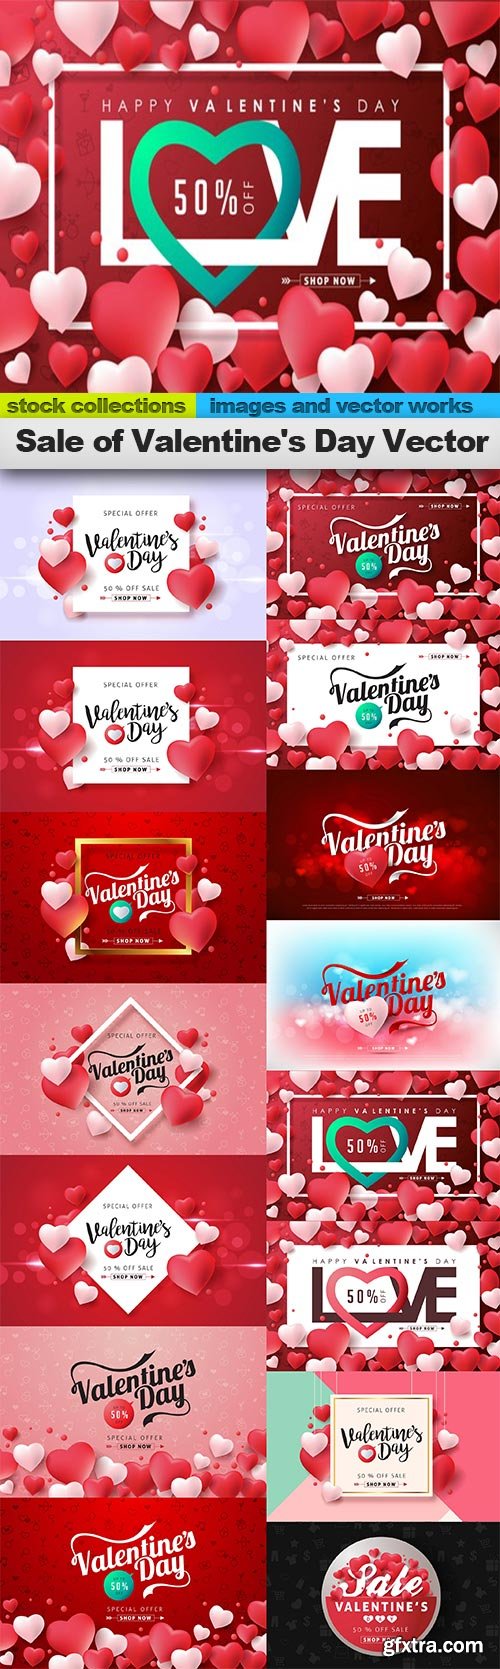 Sale of Valentine's Day Vector, 15 x EPS